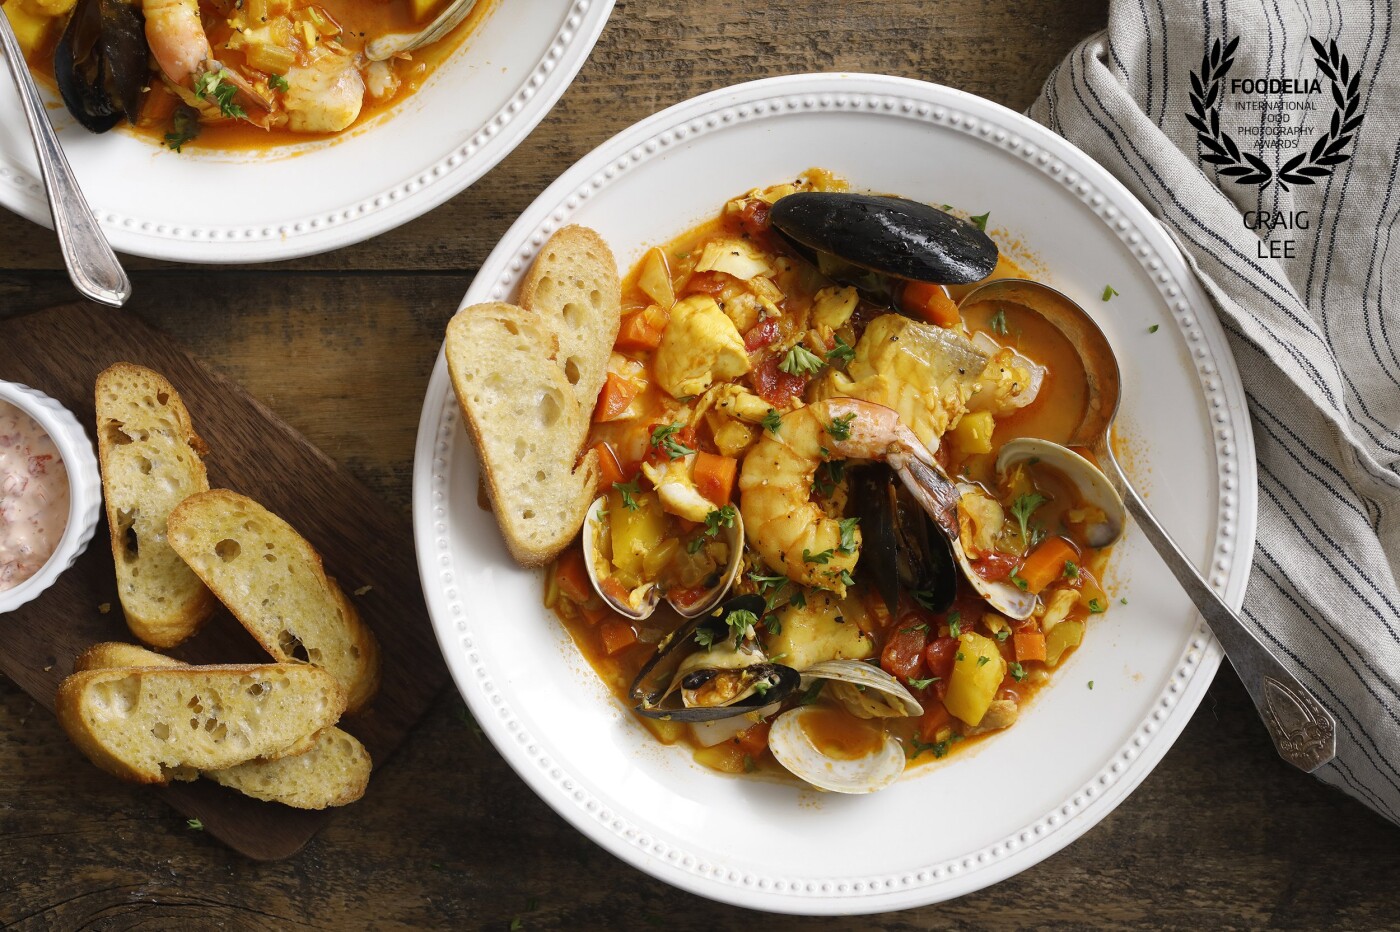 Mark Bittman's Bouillabaisse recipe for The New York Times Food section @nytfood. For a soup base that will make this superb, @markbittman says seafood is the stock answer. Styled by @the_bojon_gourmet and @snixykitchen.